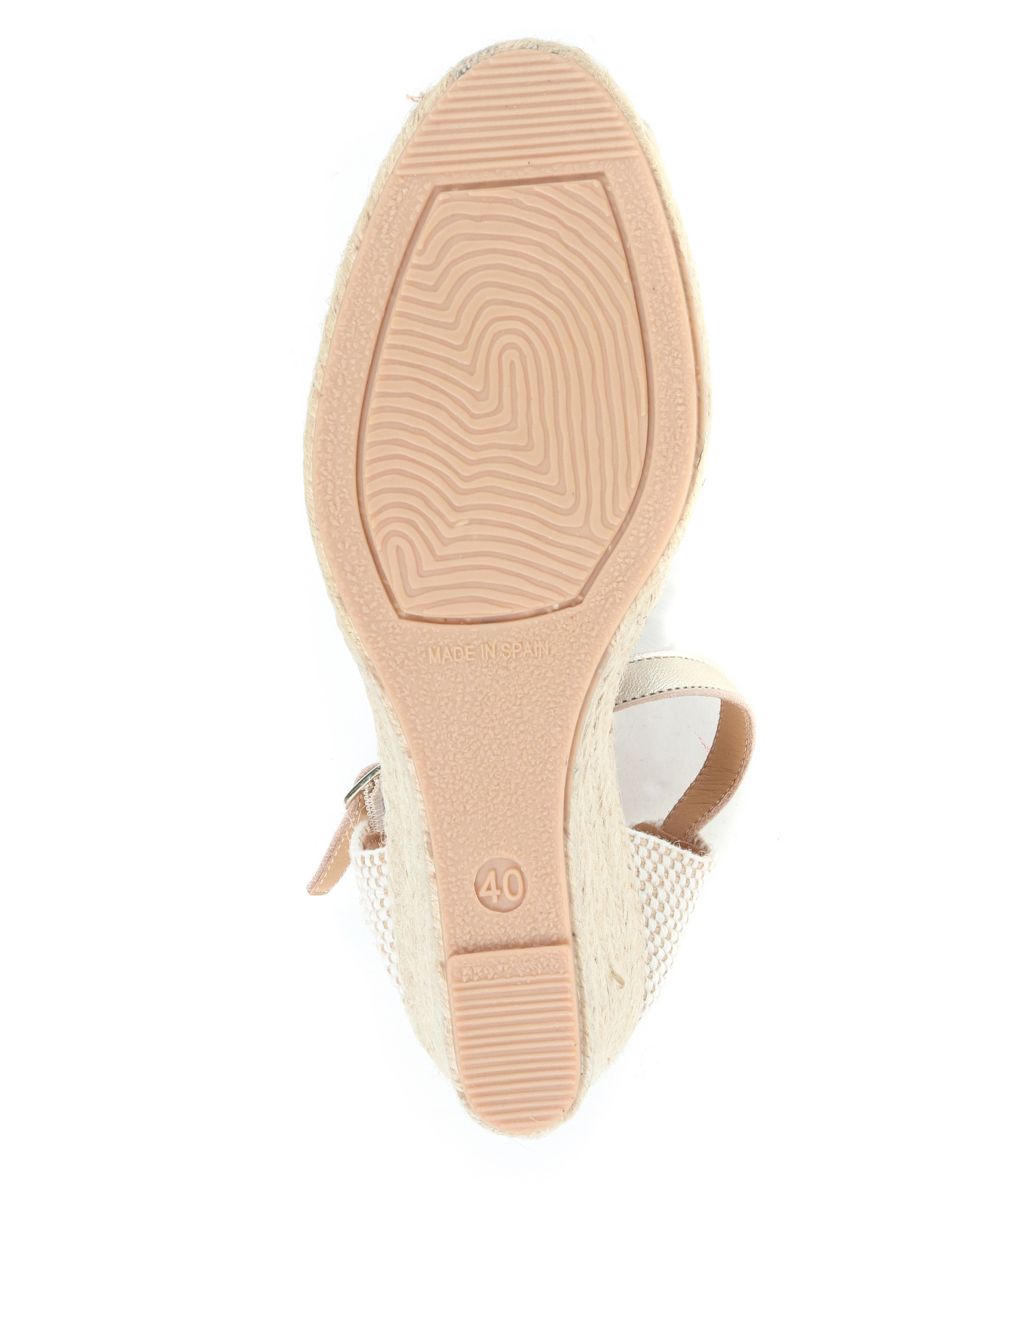 Leather Ankle Strap Wedge Espadrilles image 4